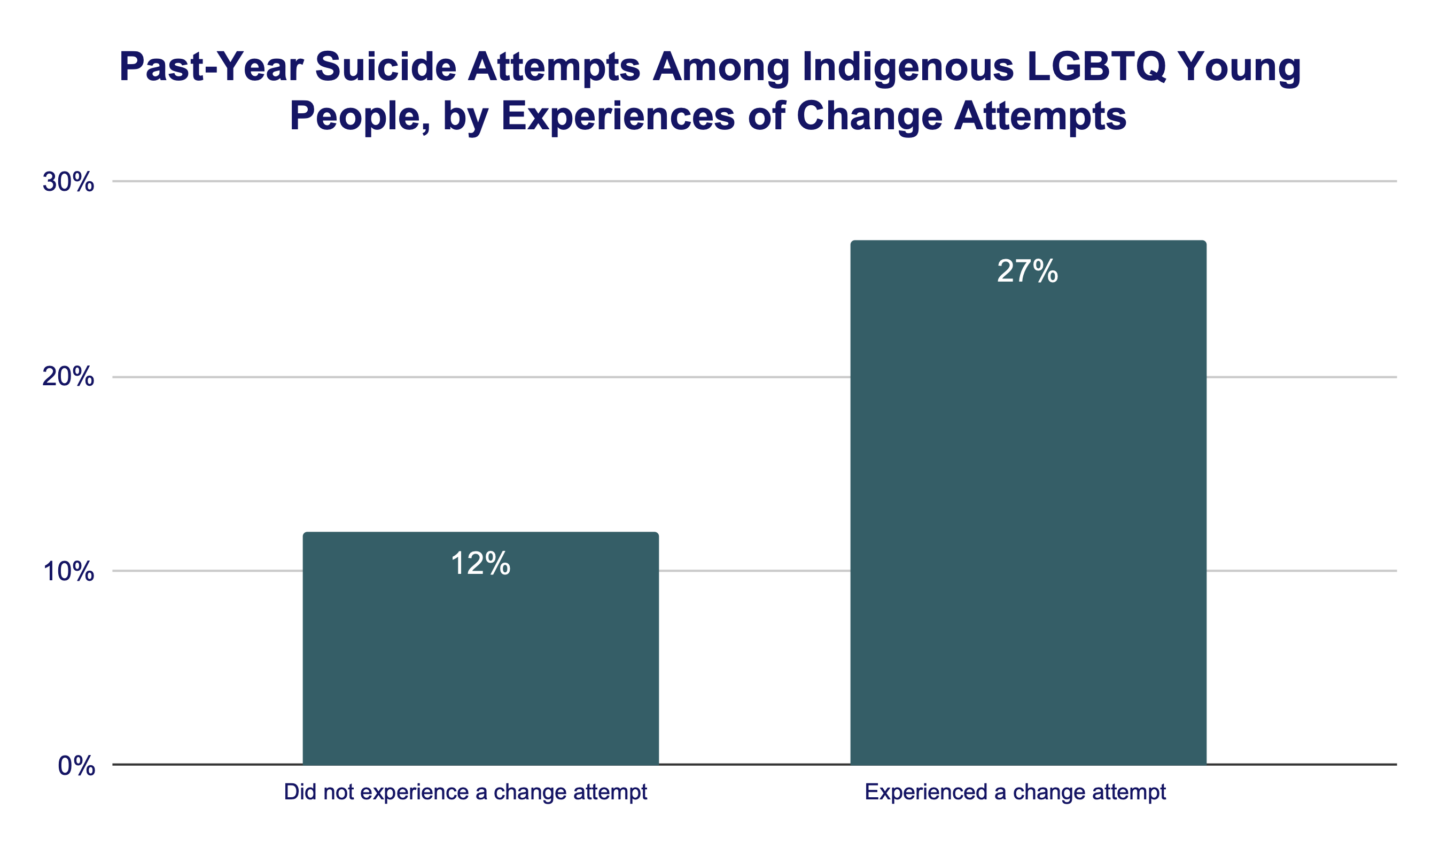 Past Year Suicide Attempts Among Indigenous LGBTQ Young People by Experience of Change Attempts